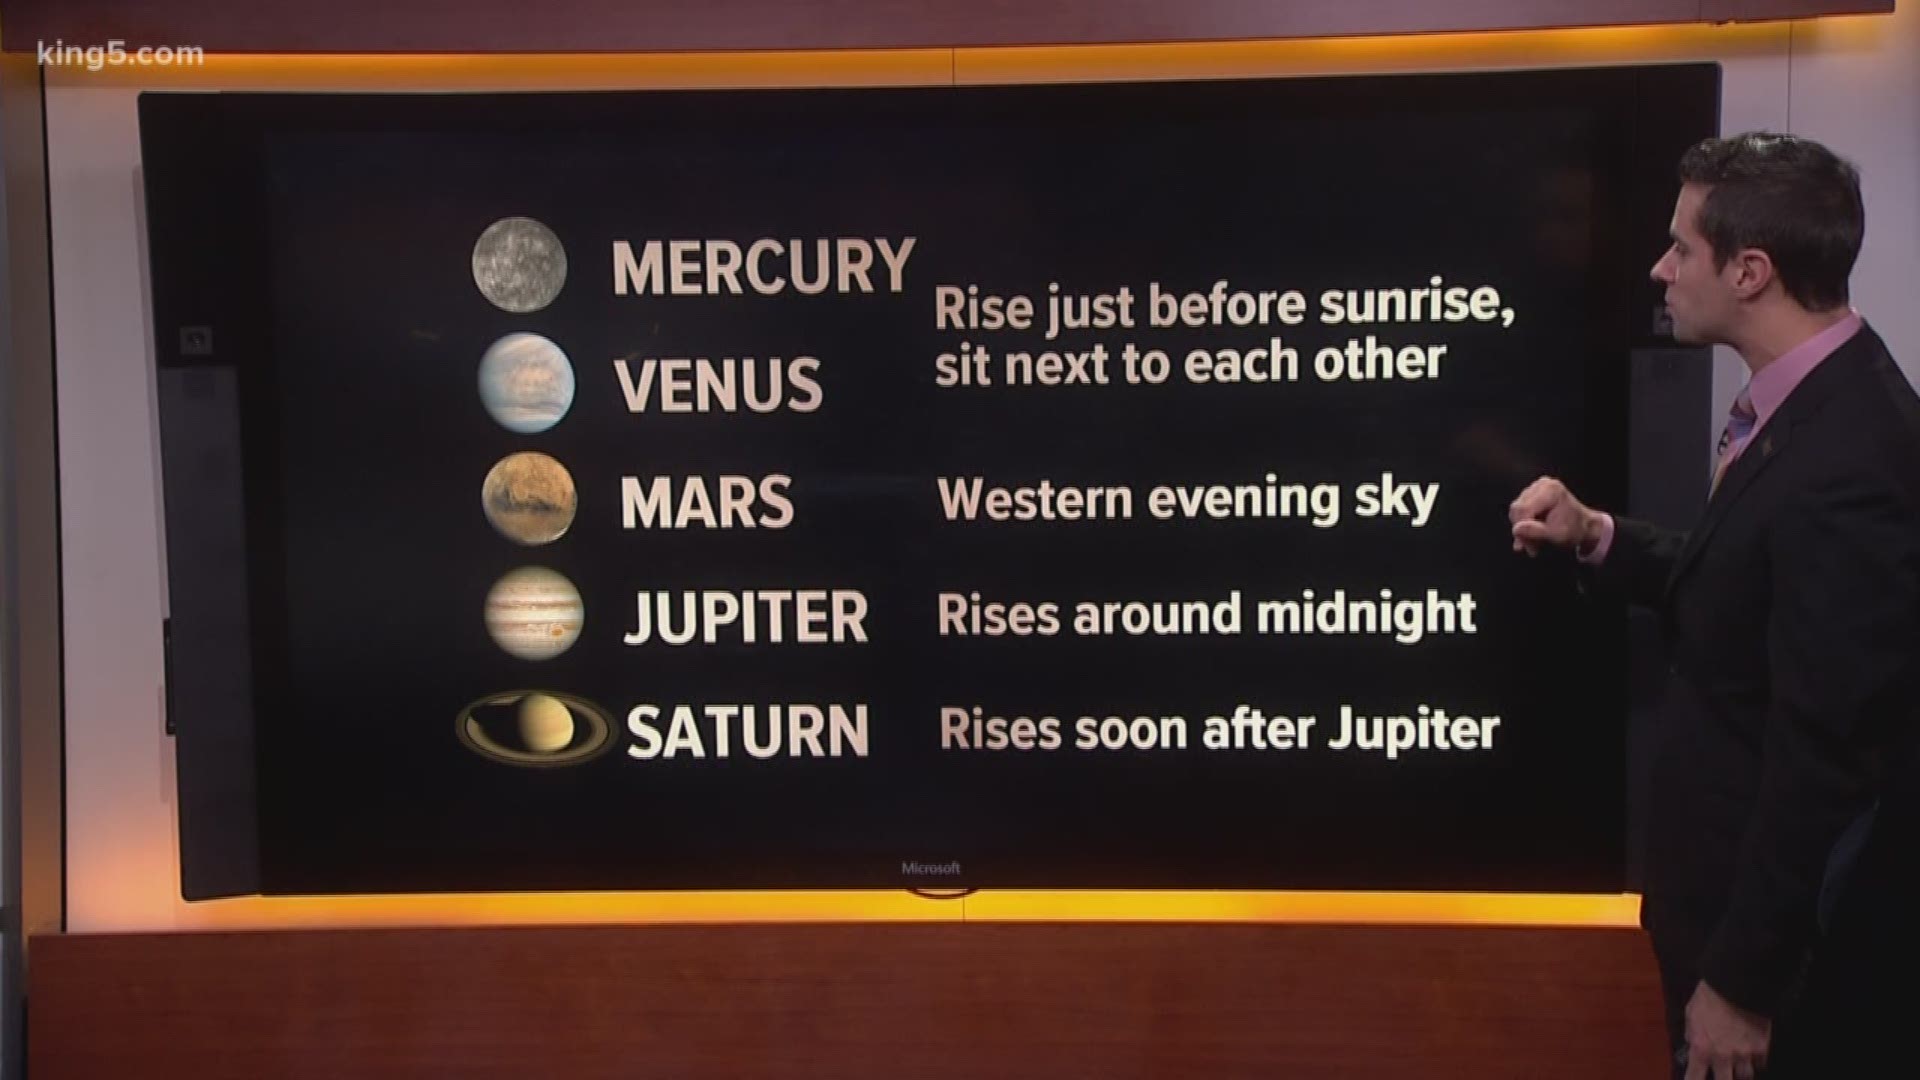 We're in for a treat this weekend: meteor showers, a pink moon and much more. KING 5's Meteorologist Ben Dery explains this weekend's astronomical events.